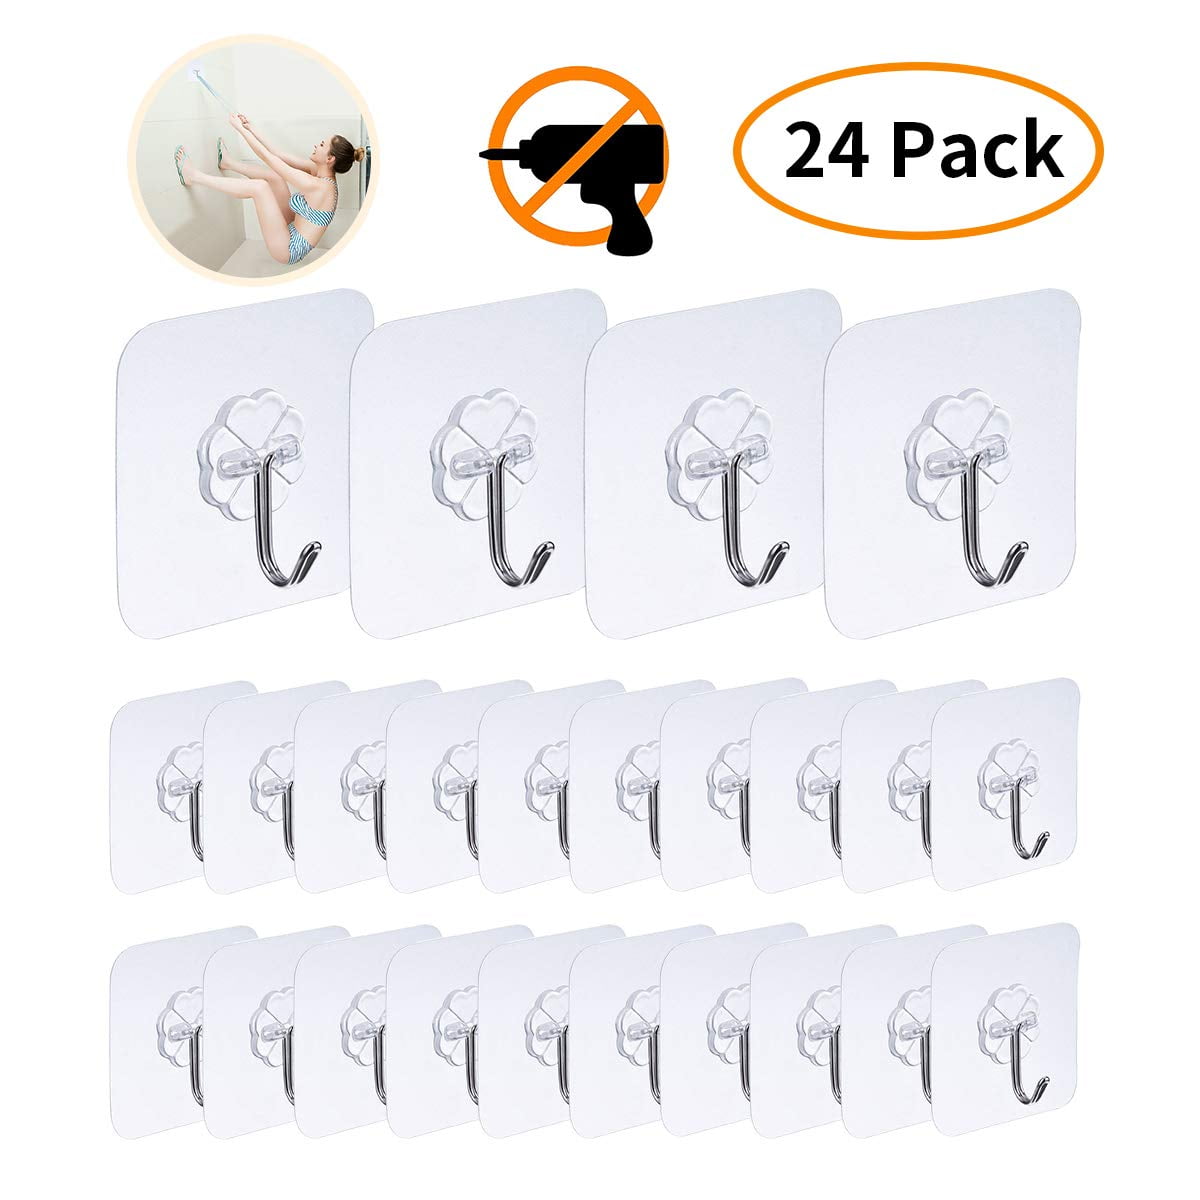 Details about   3pcs Self Adhesive Hooks BLACK Strong Square Stick on Hook m Center Sticky R5X0 